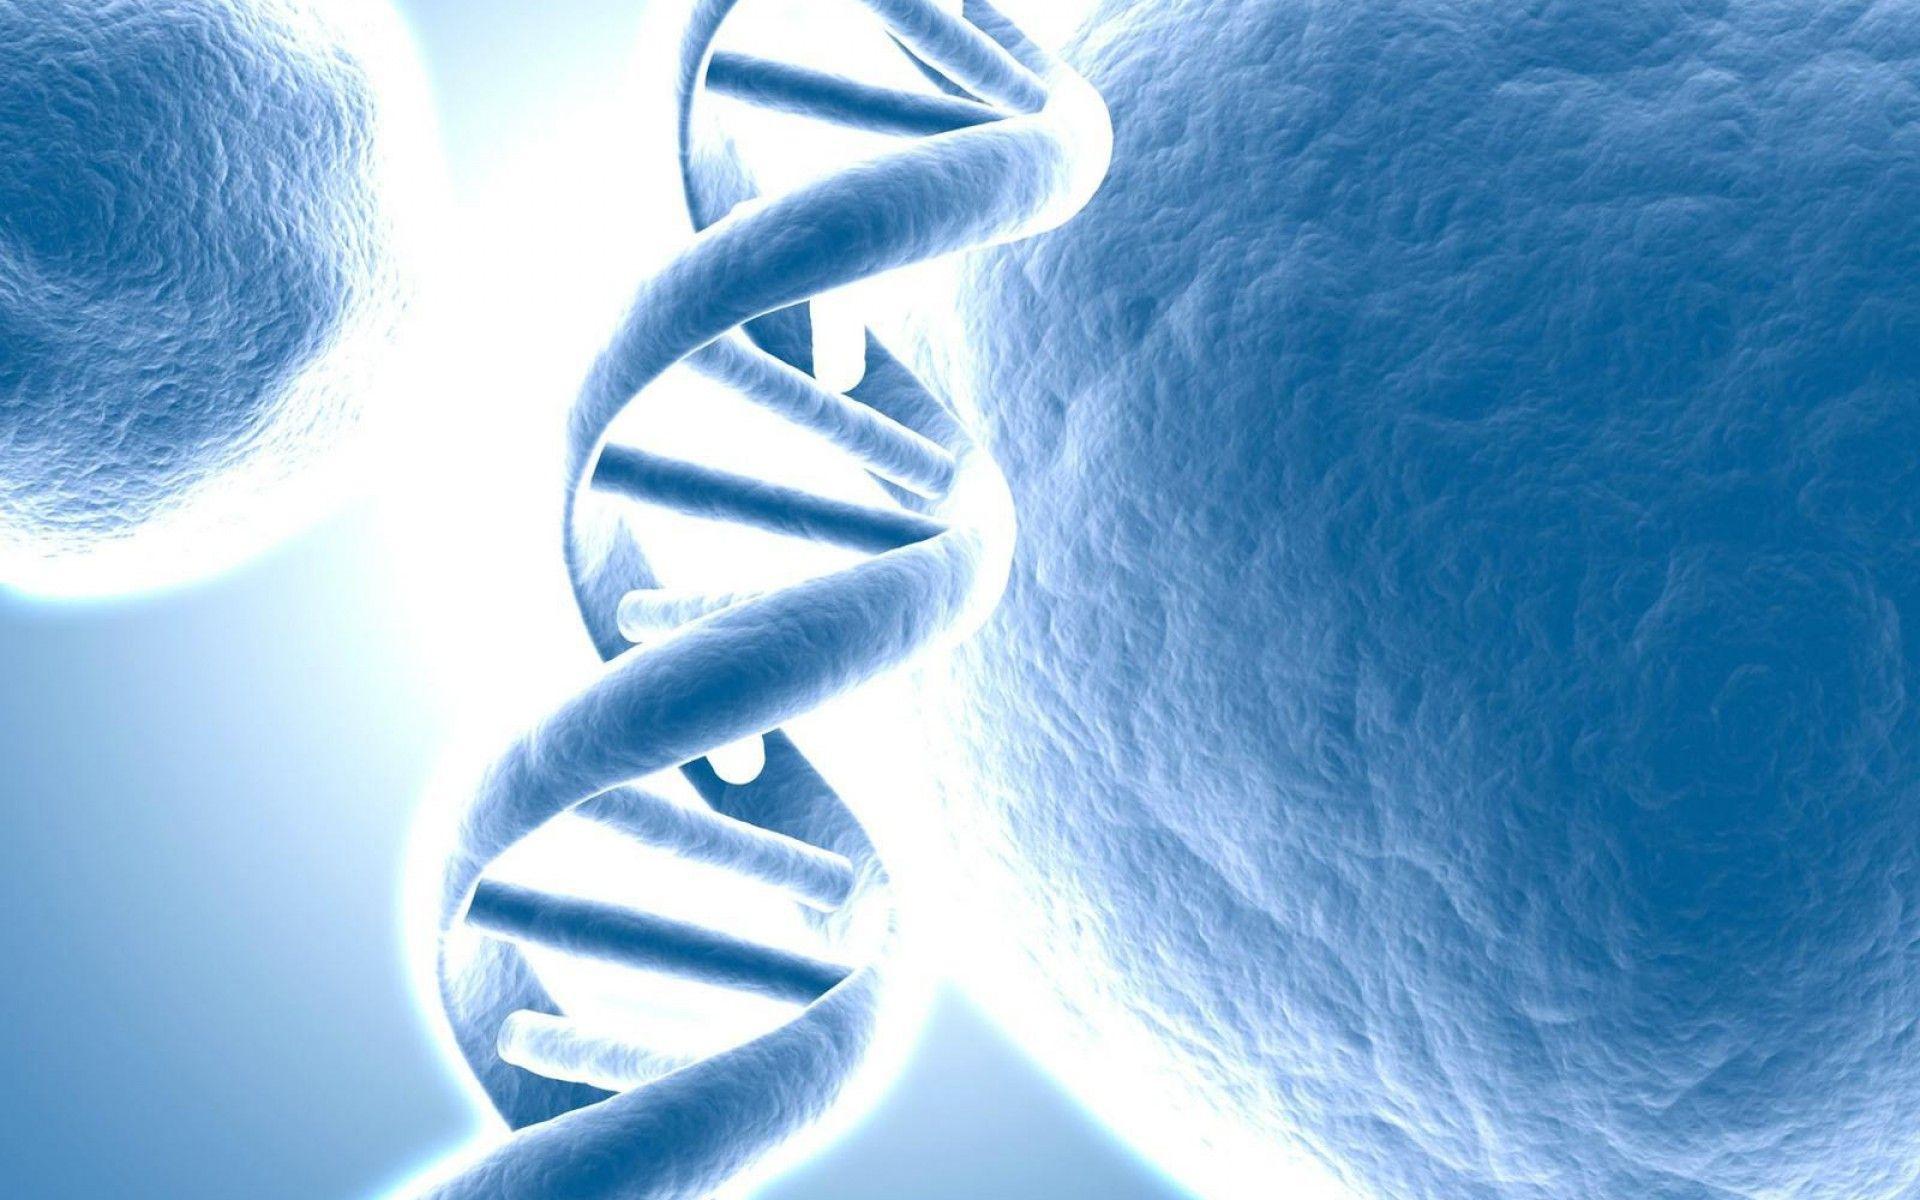 DNA Structure Wallpaper